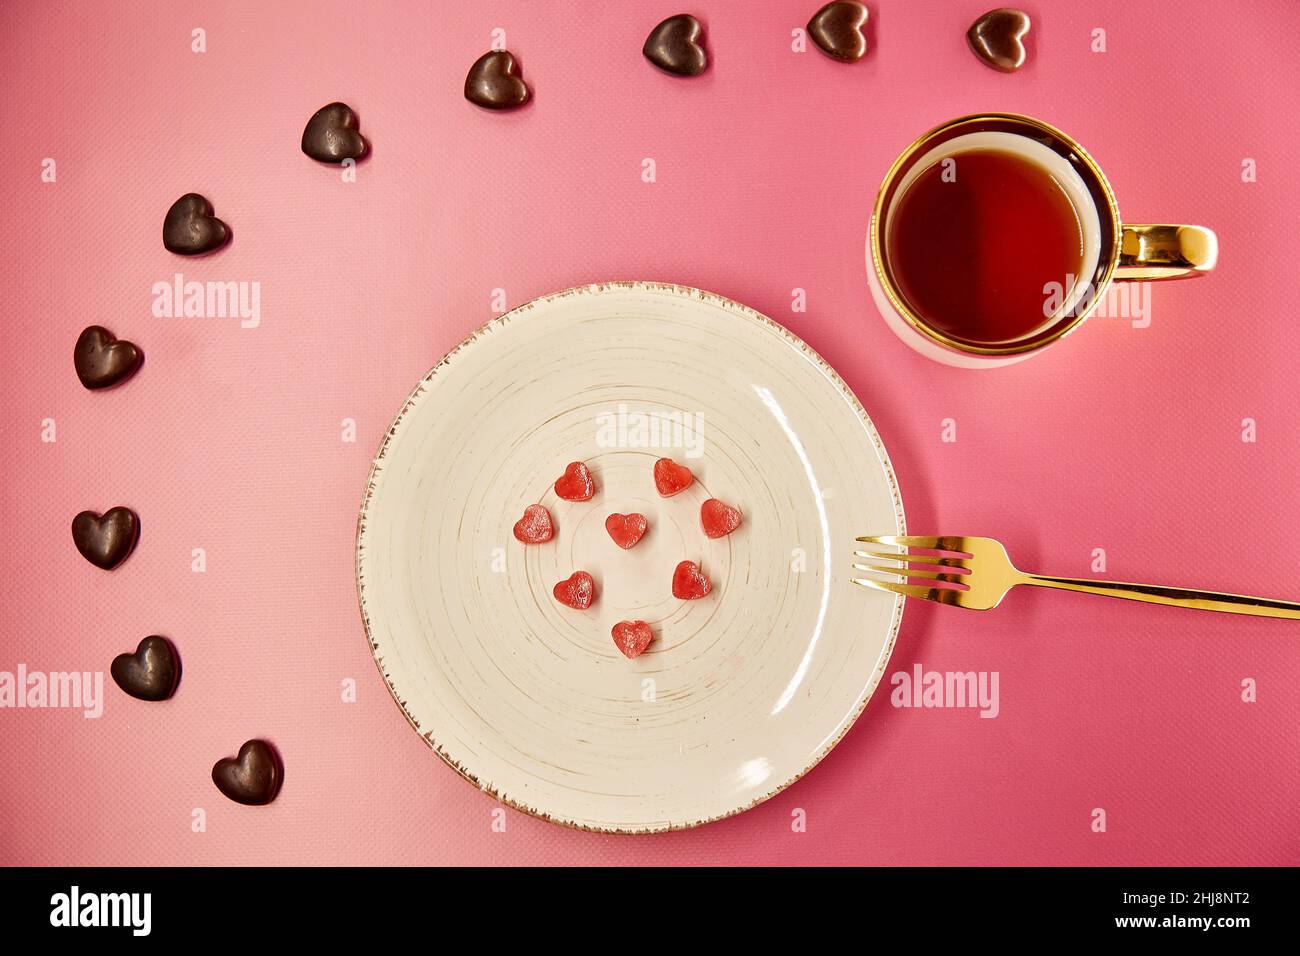 Cute frozen ice hearts on white plate with fork. Chocolate hearts sweets. Creative romantic dinner, Valentines Day concept. Pink gradient background. Top view. Stock Photo